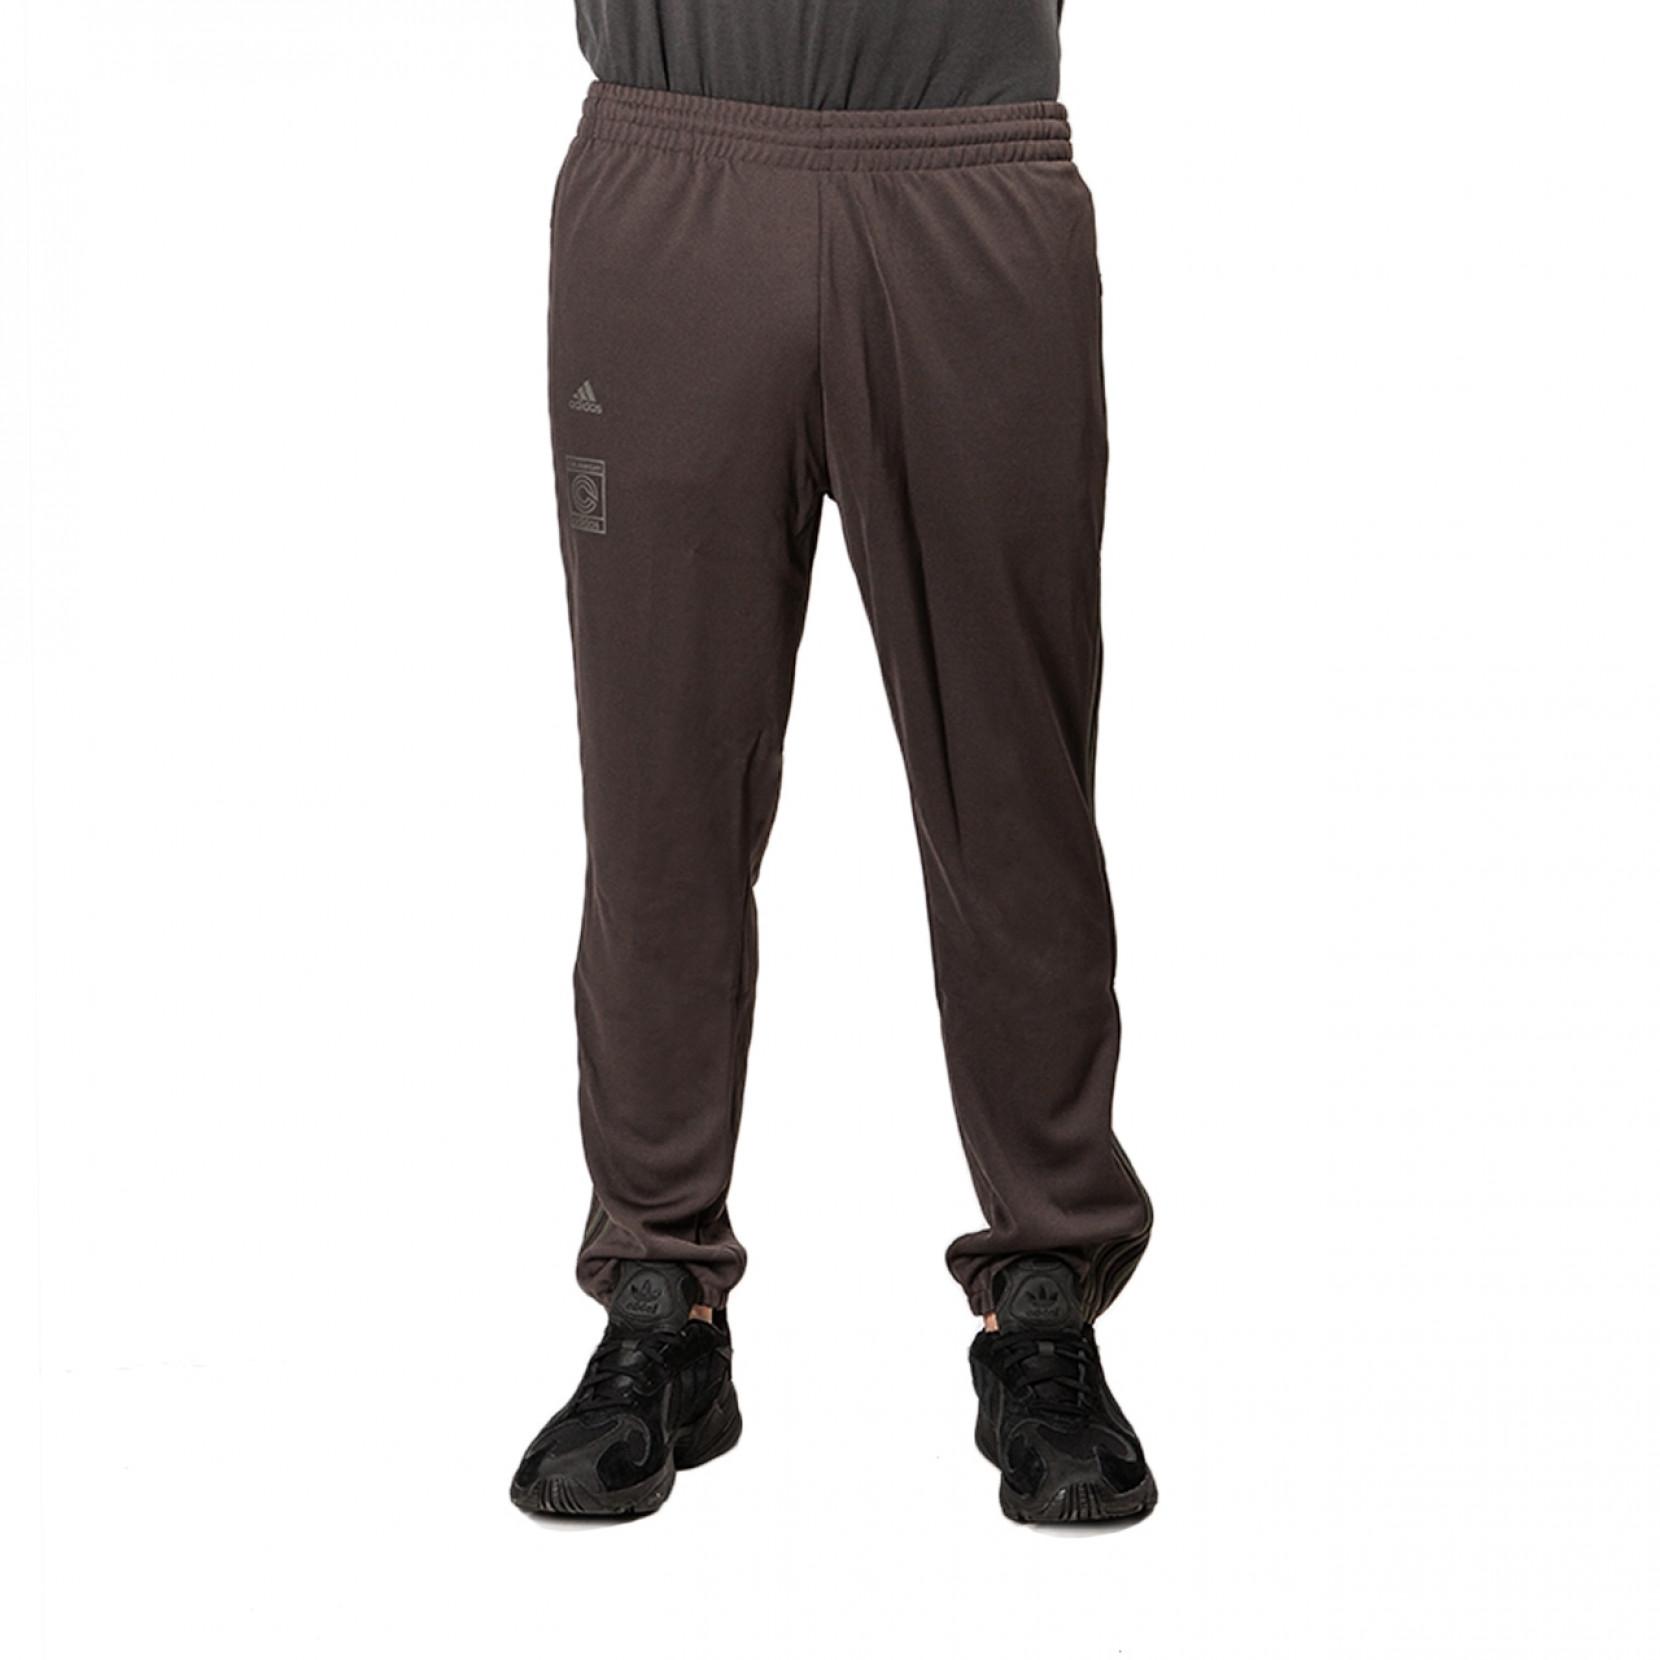 adidas Synthetic Yeezy Calabasas Track Pant in Grey (Gray) for Men - Lyst